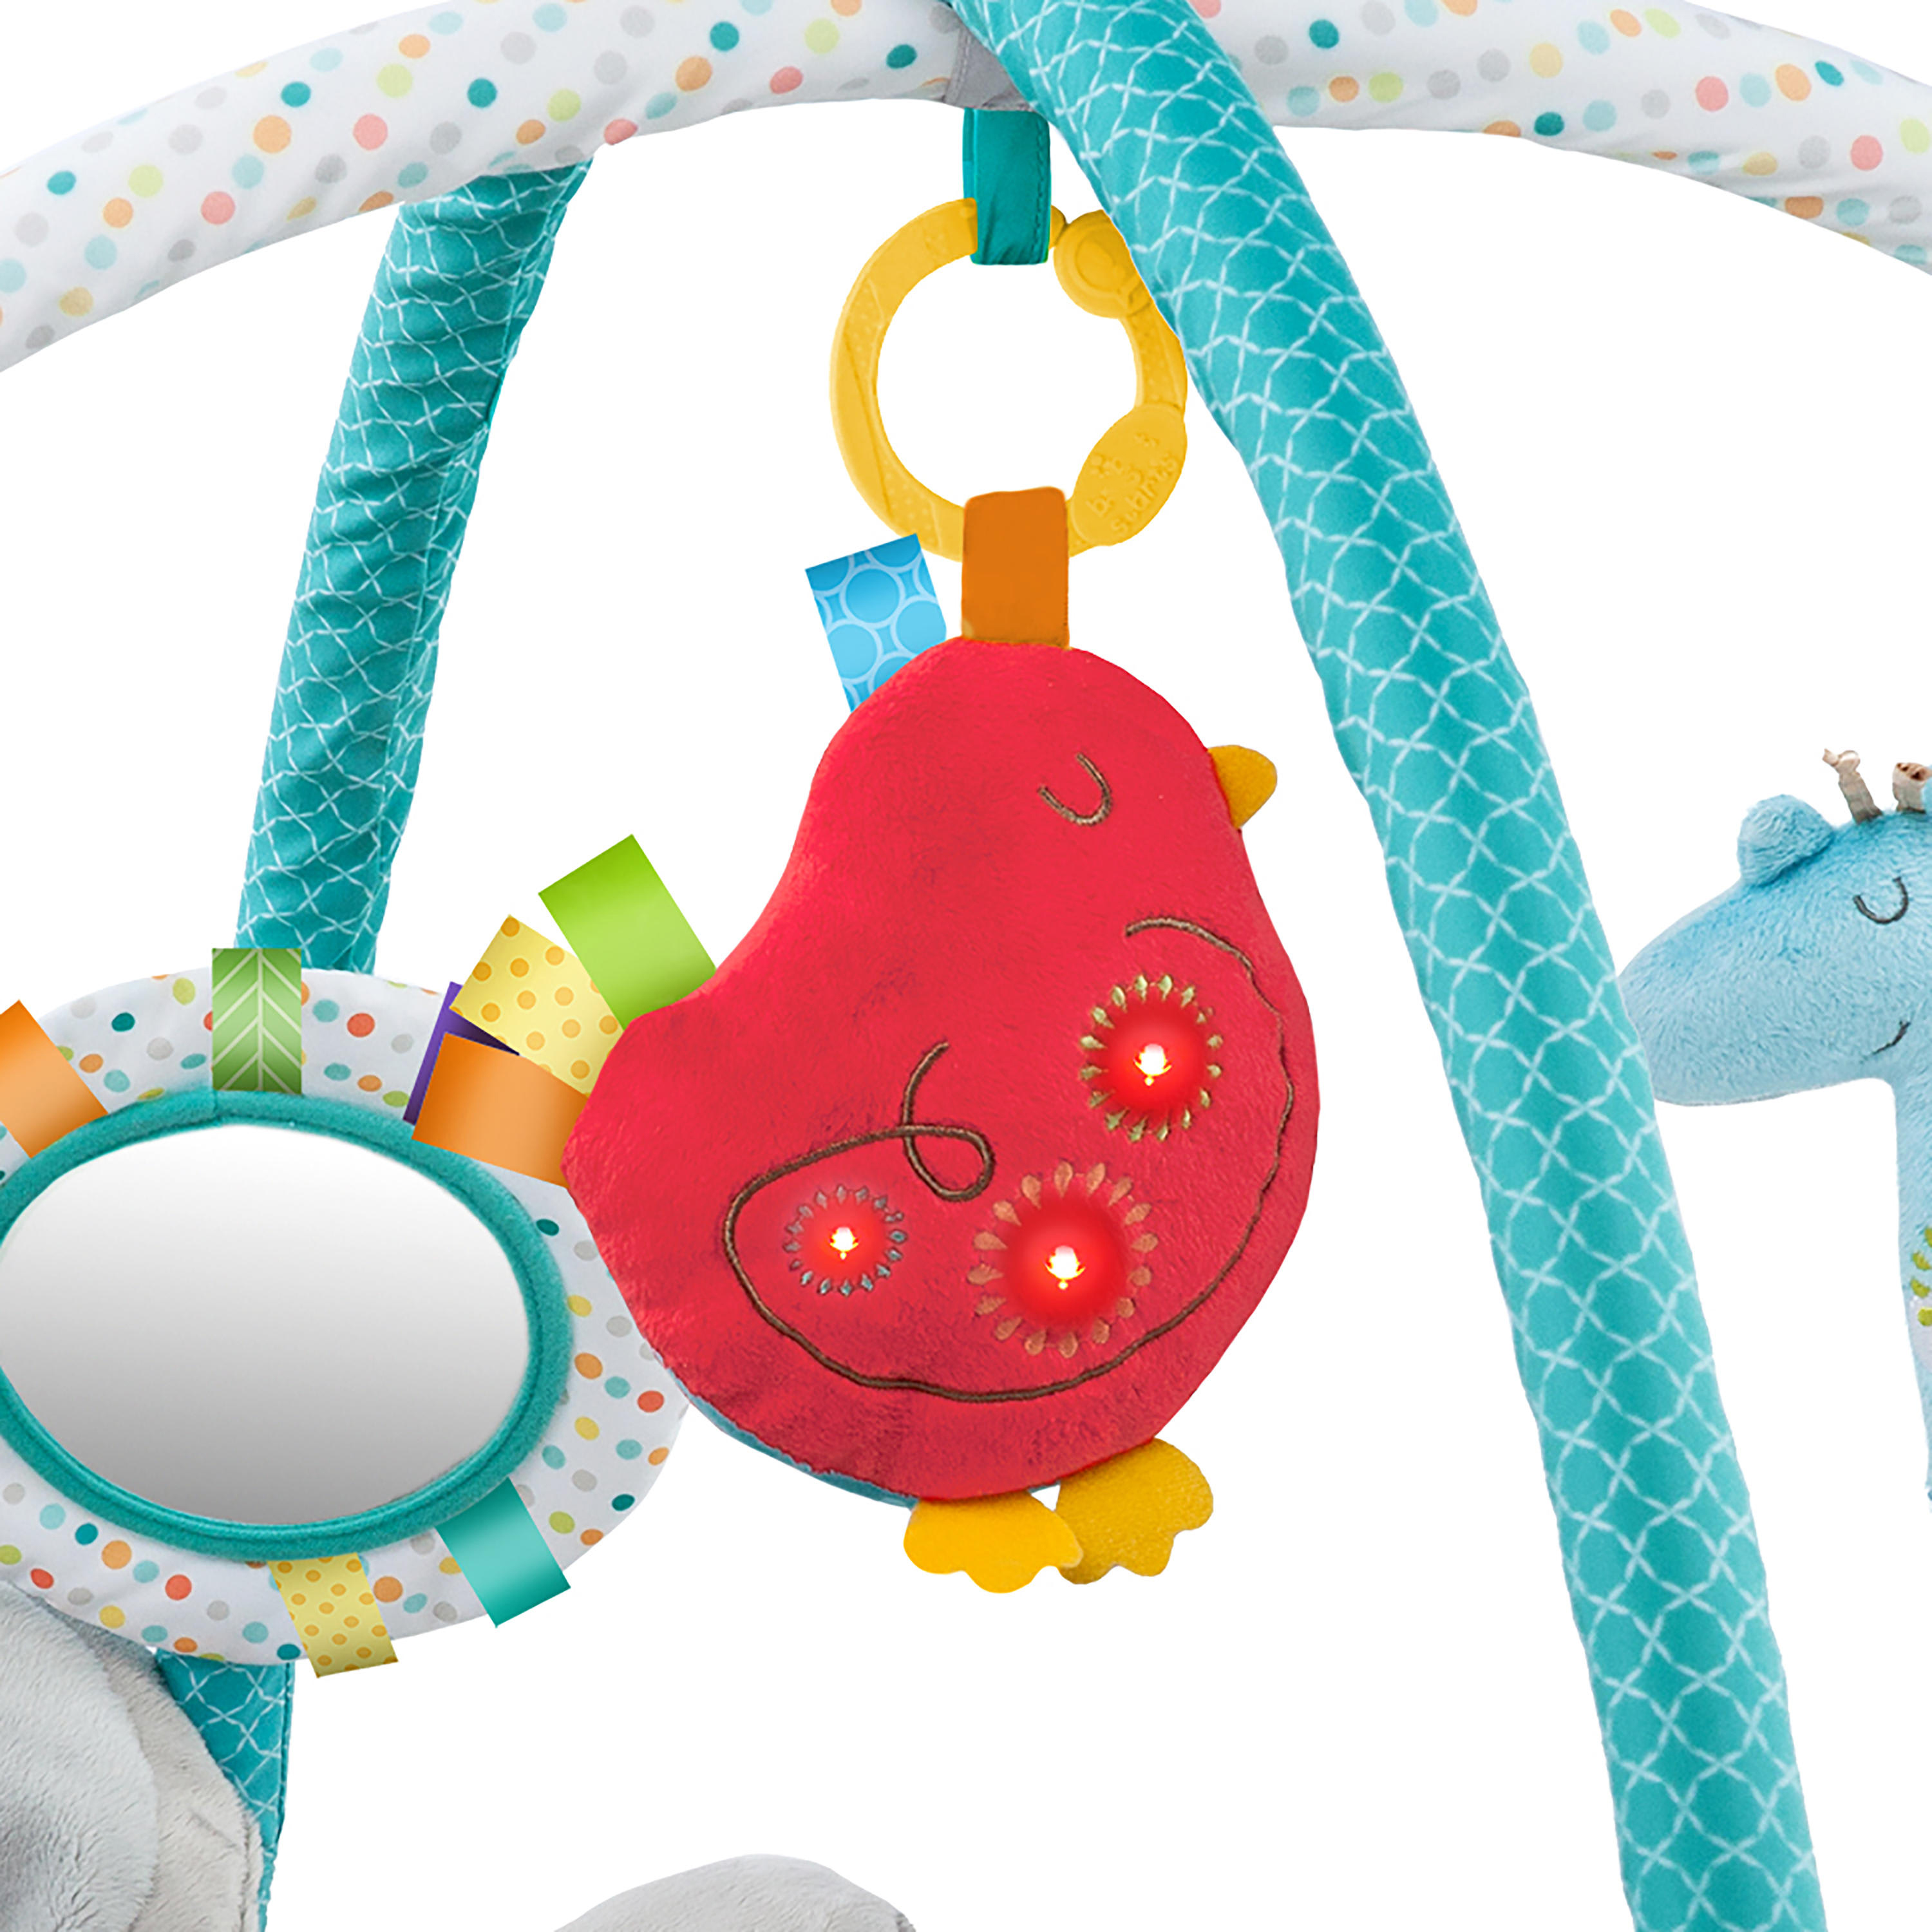 Momobebe 3 in 1 Ultra Soft Playmat with Musical Toy for 0 to 36M